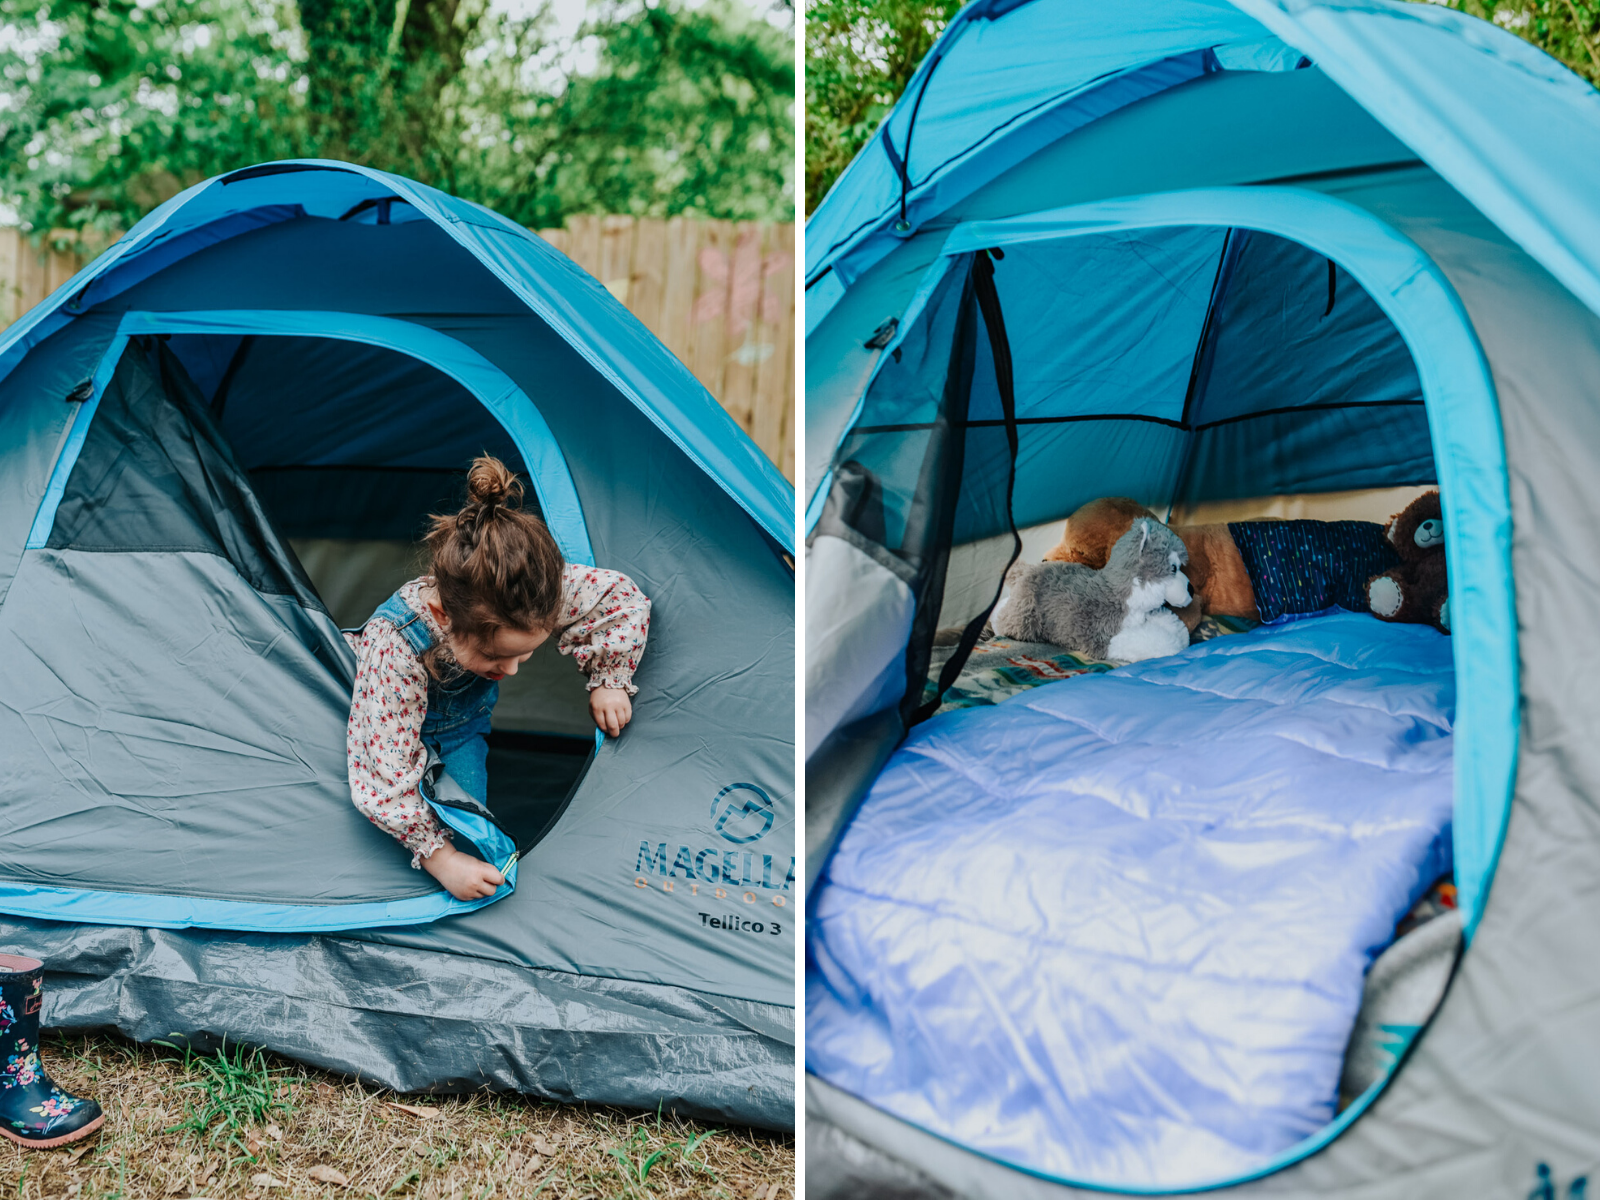 Backyard Camping by popular Memphis lifestyle blog, Lone Star Looking Glass: image of a little girl zipping up a Academy Magellan Outdoors Tellico 3 Person Dome Tent with a Academy Queen-Size Plush Top Airbed and Academy Magellan Outdoors Kids' 45-Degree F Rectangular Sleeping Bag inside.